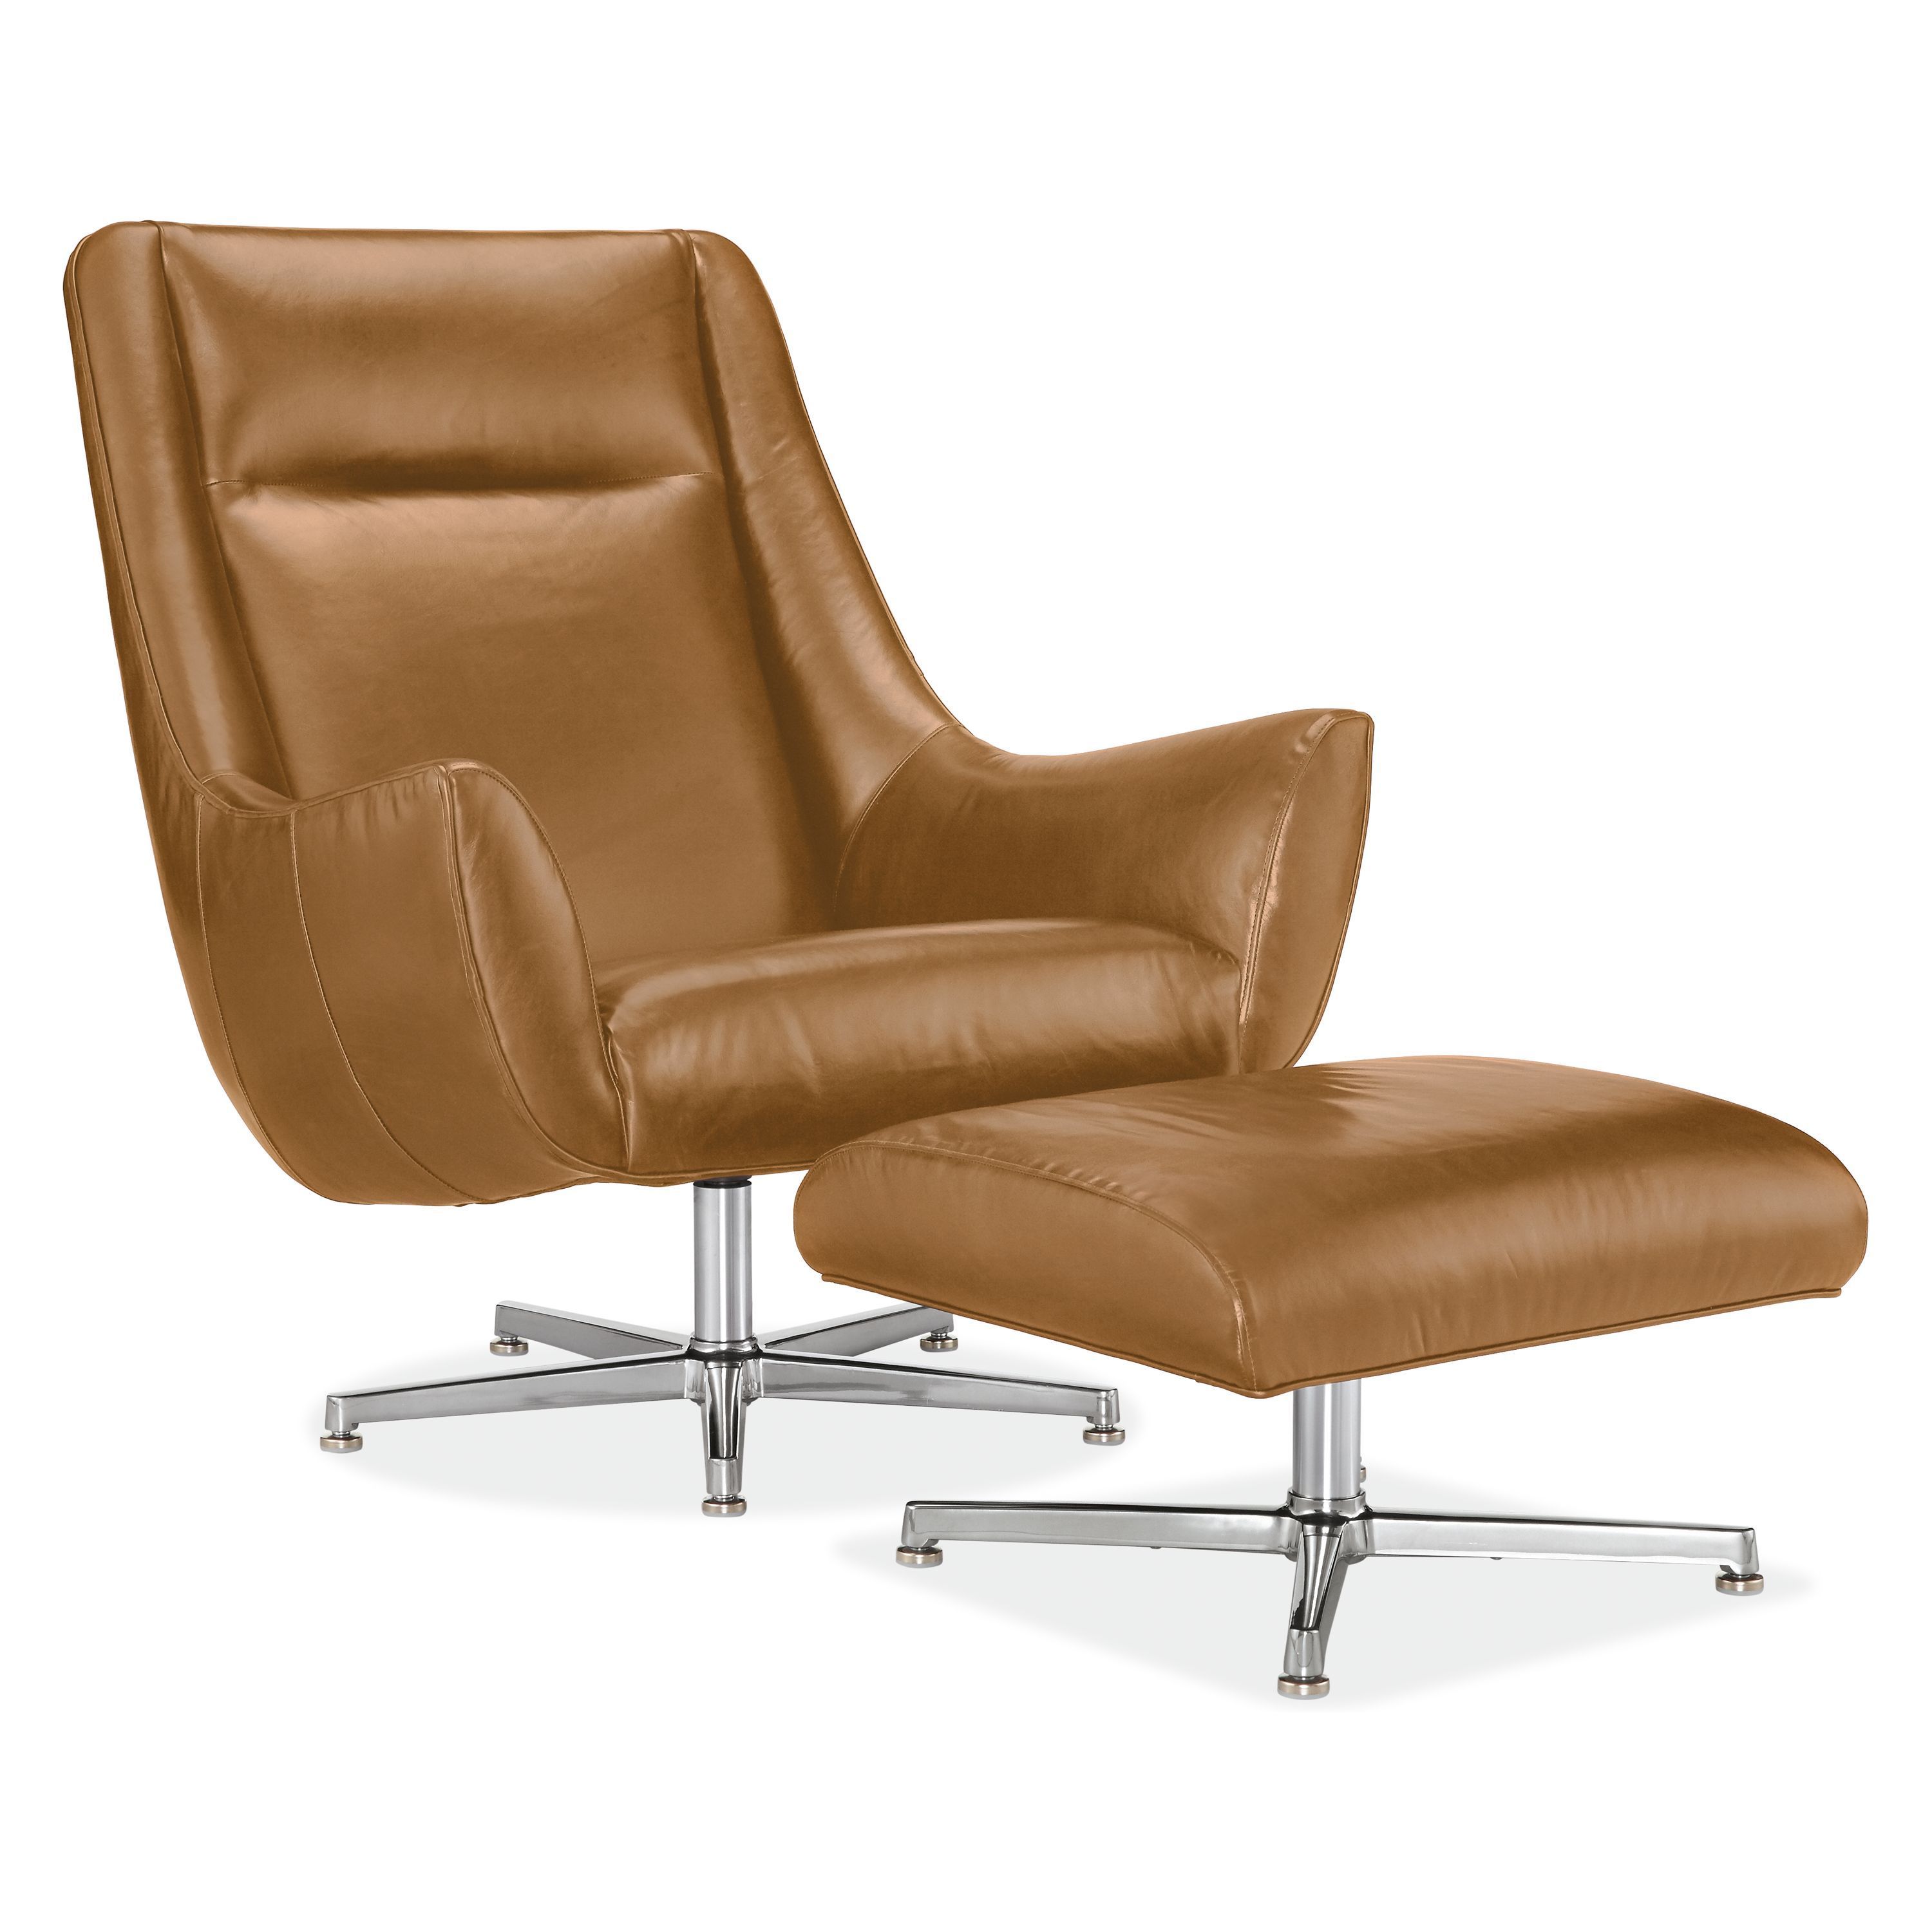 Charles Leather Swivel Chair & Ottoman In 2018 | Products With Regard To Espresso Leather Swivel Chairs (View 18 of 25)